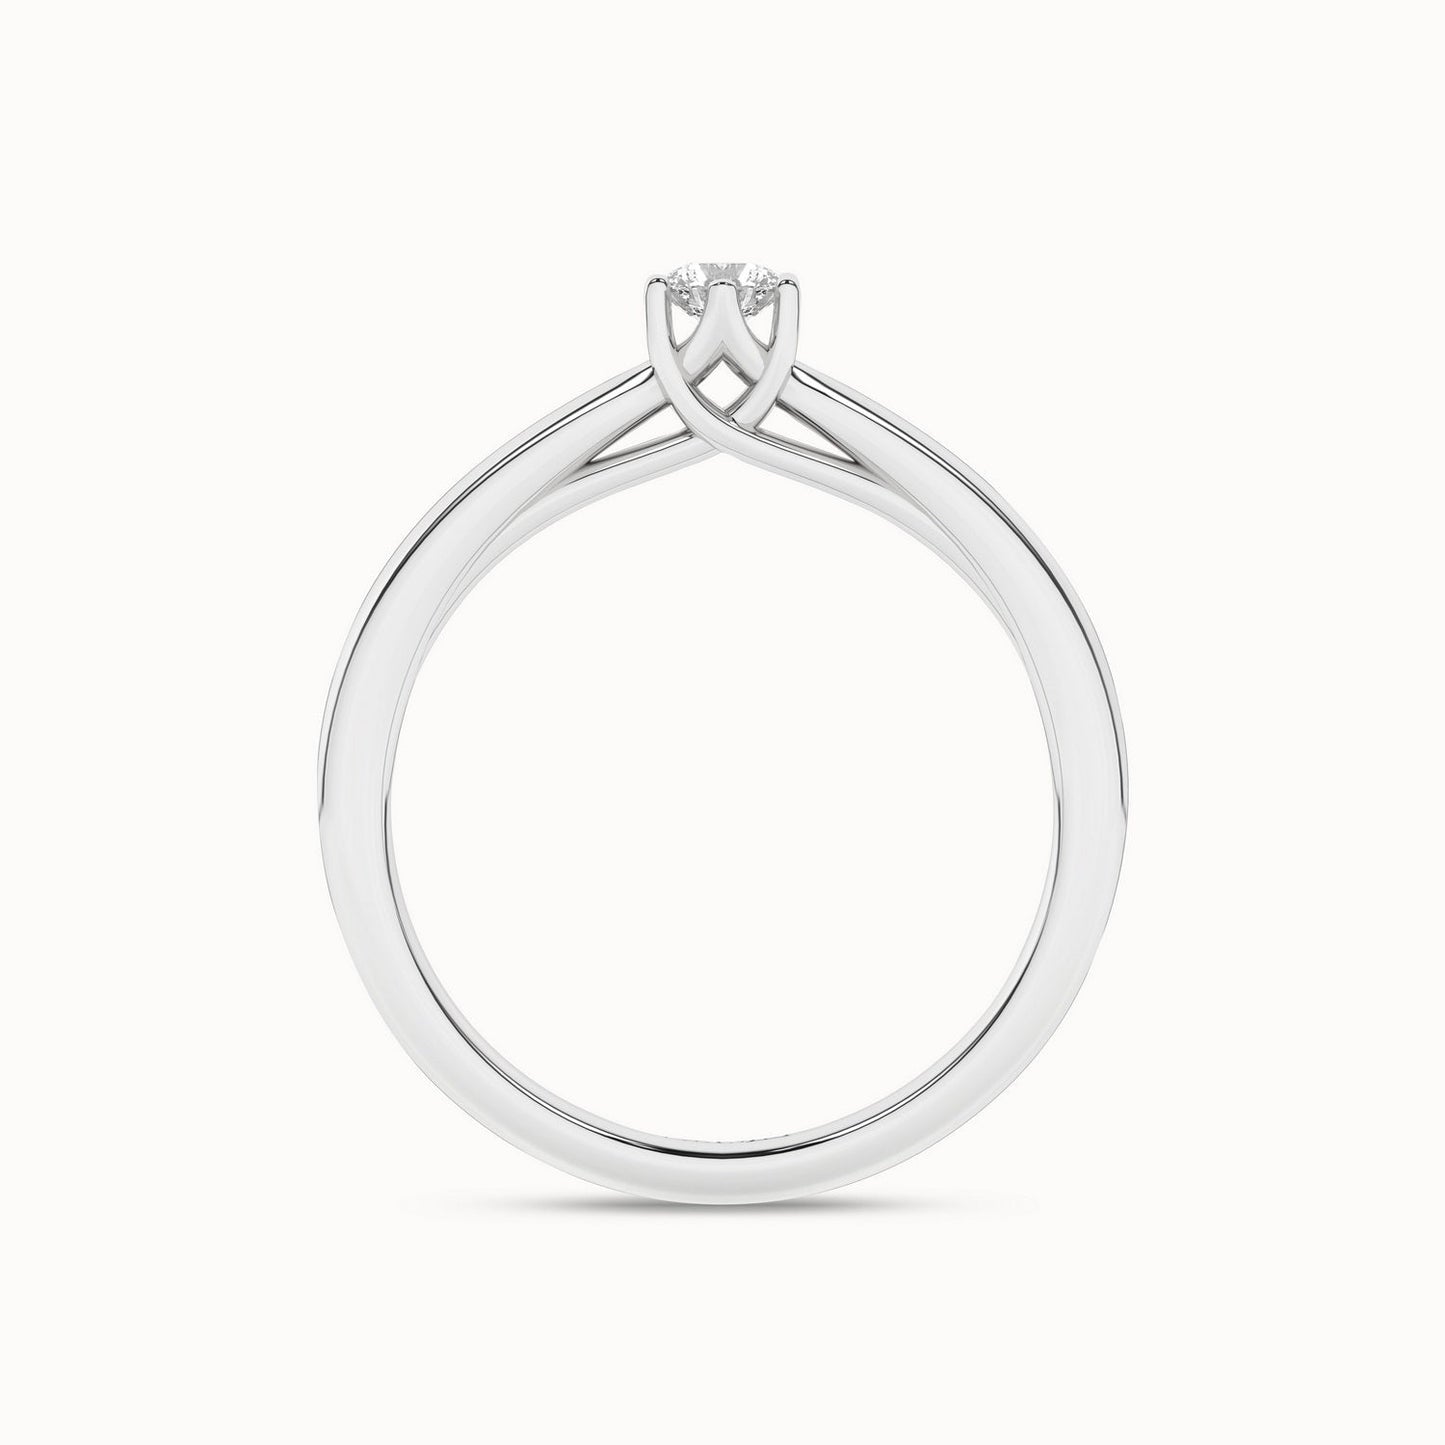 6-Pronged Round Ring_Product Angle_1/6Ct - 2